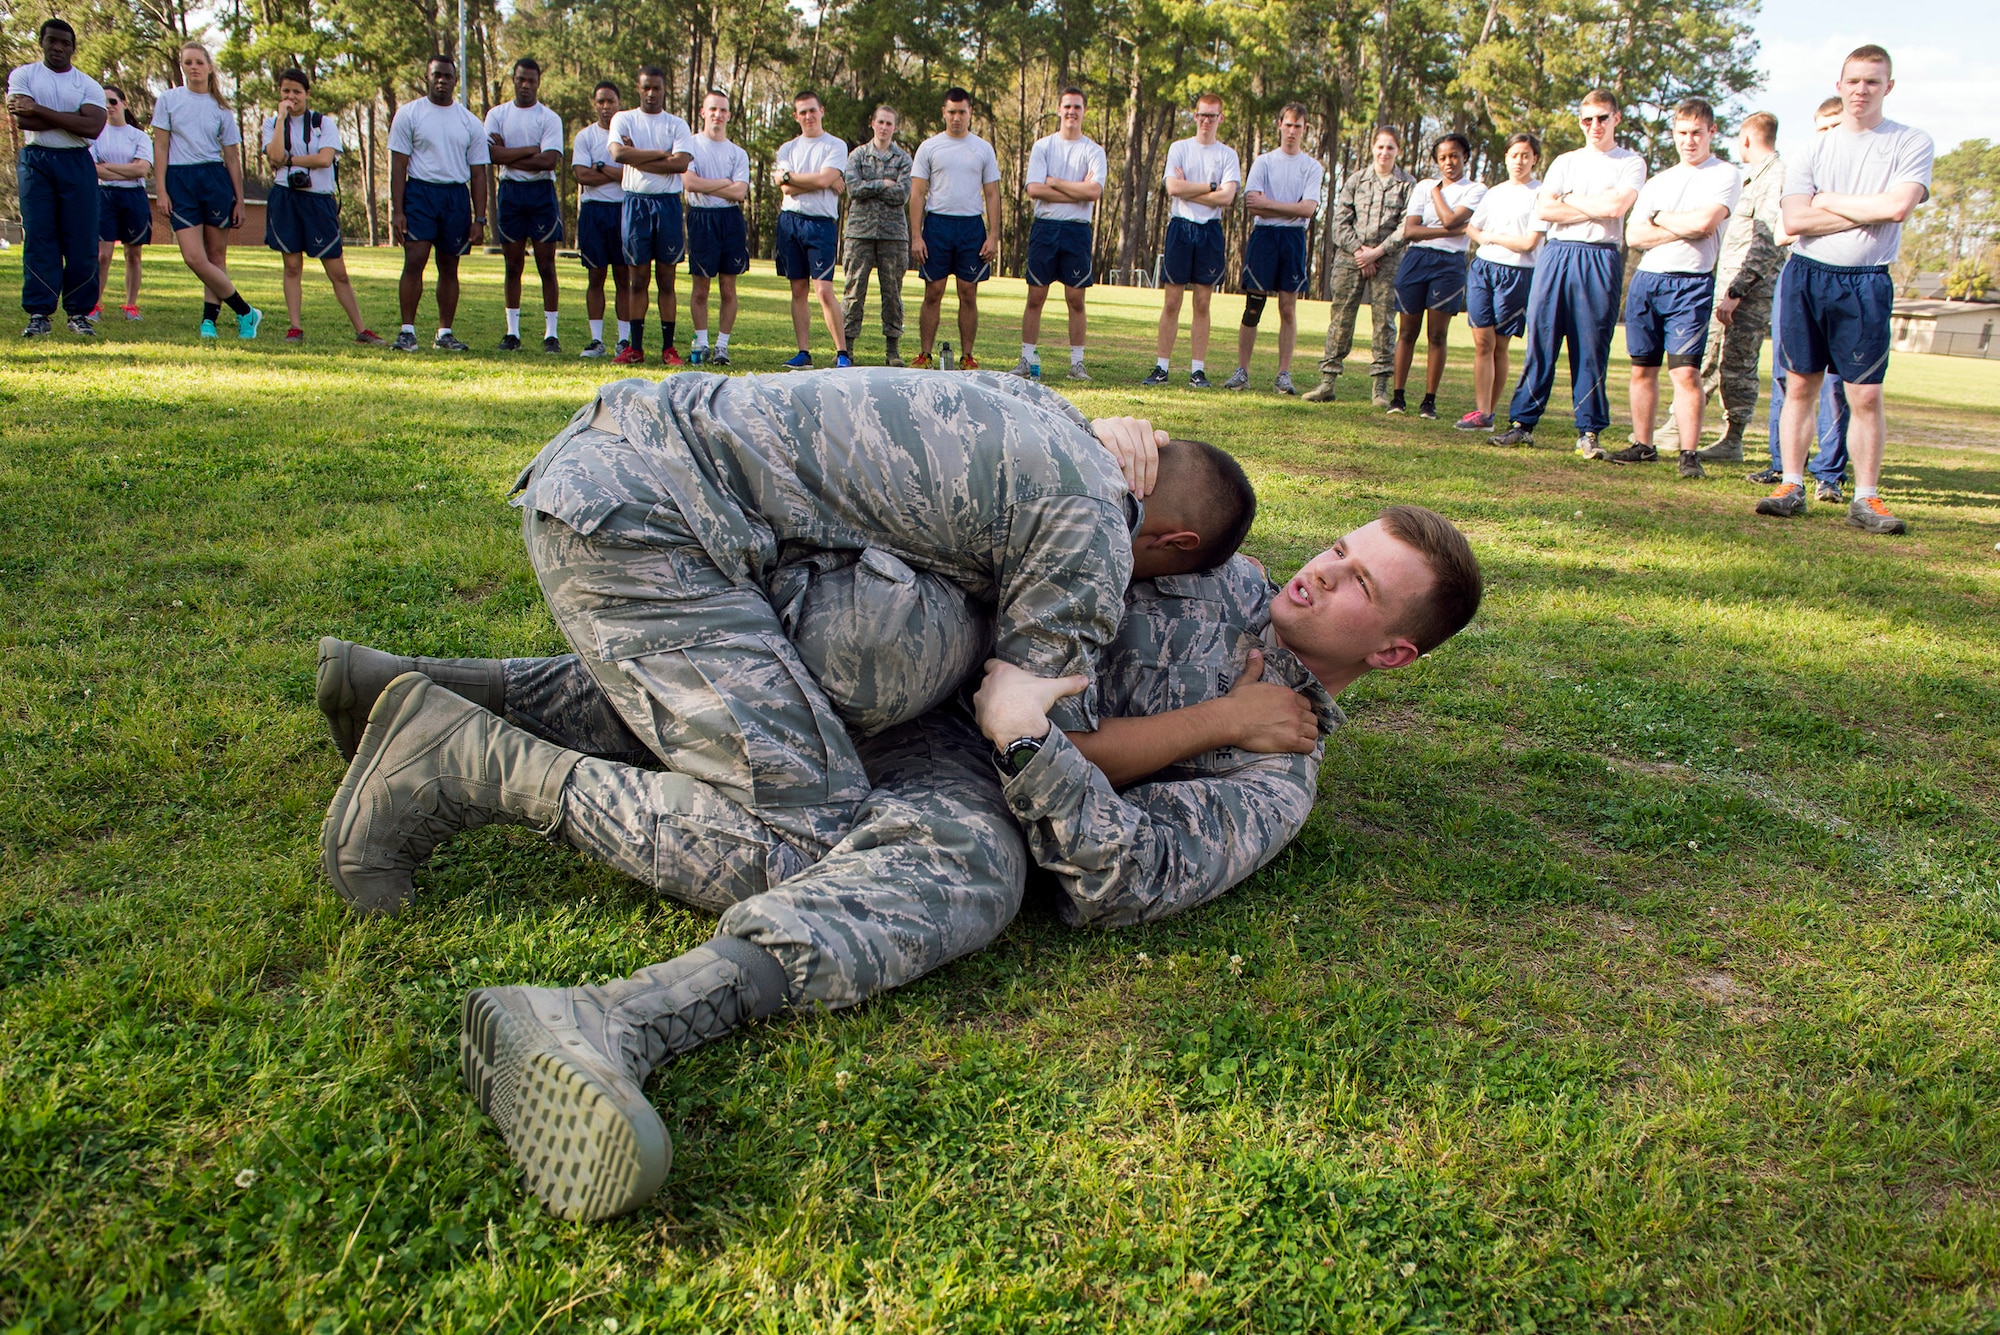 Cadet Col. Bradley Joyal, Air Force ROTC Detachment 172 cadet wing commander, bottom right, grapples with Cadet 2nd Lt. Jomar Aracena, during a combatives demonstration, March 10, 2016, in Valdosta, Ga. Joyal was a combatives cadet training assistant and a certified instructor, teaching more than 1,000 cadets in 2014. (U.S. Air Force photo by Airman 1st Class Greg Nash/Released)